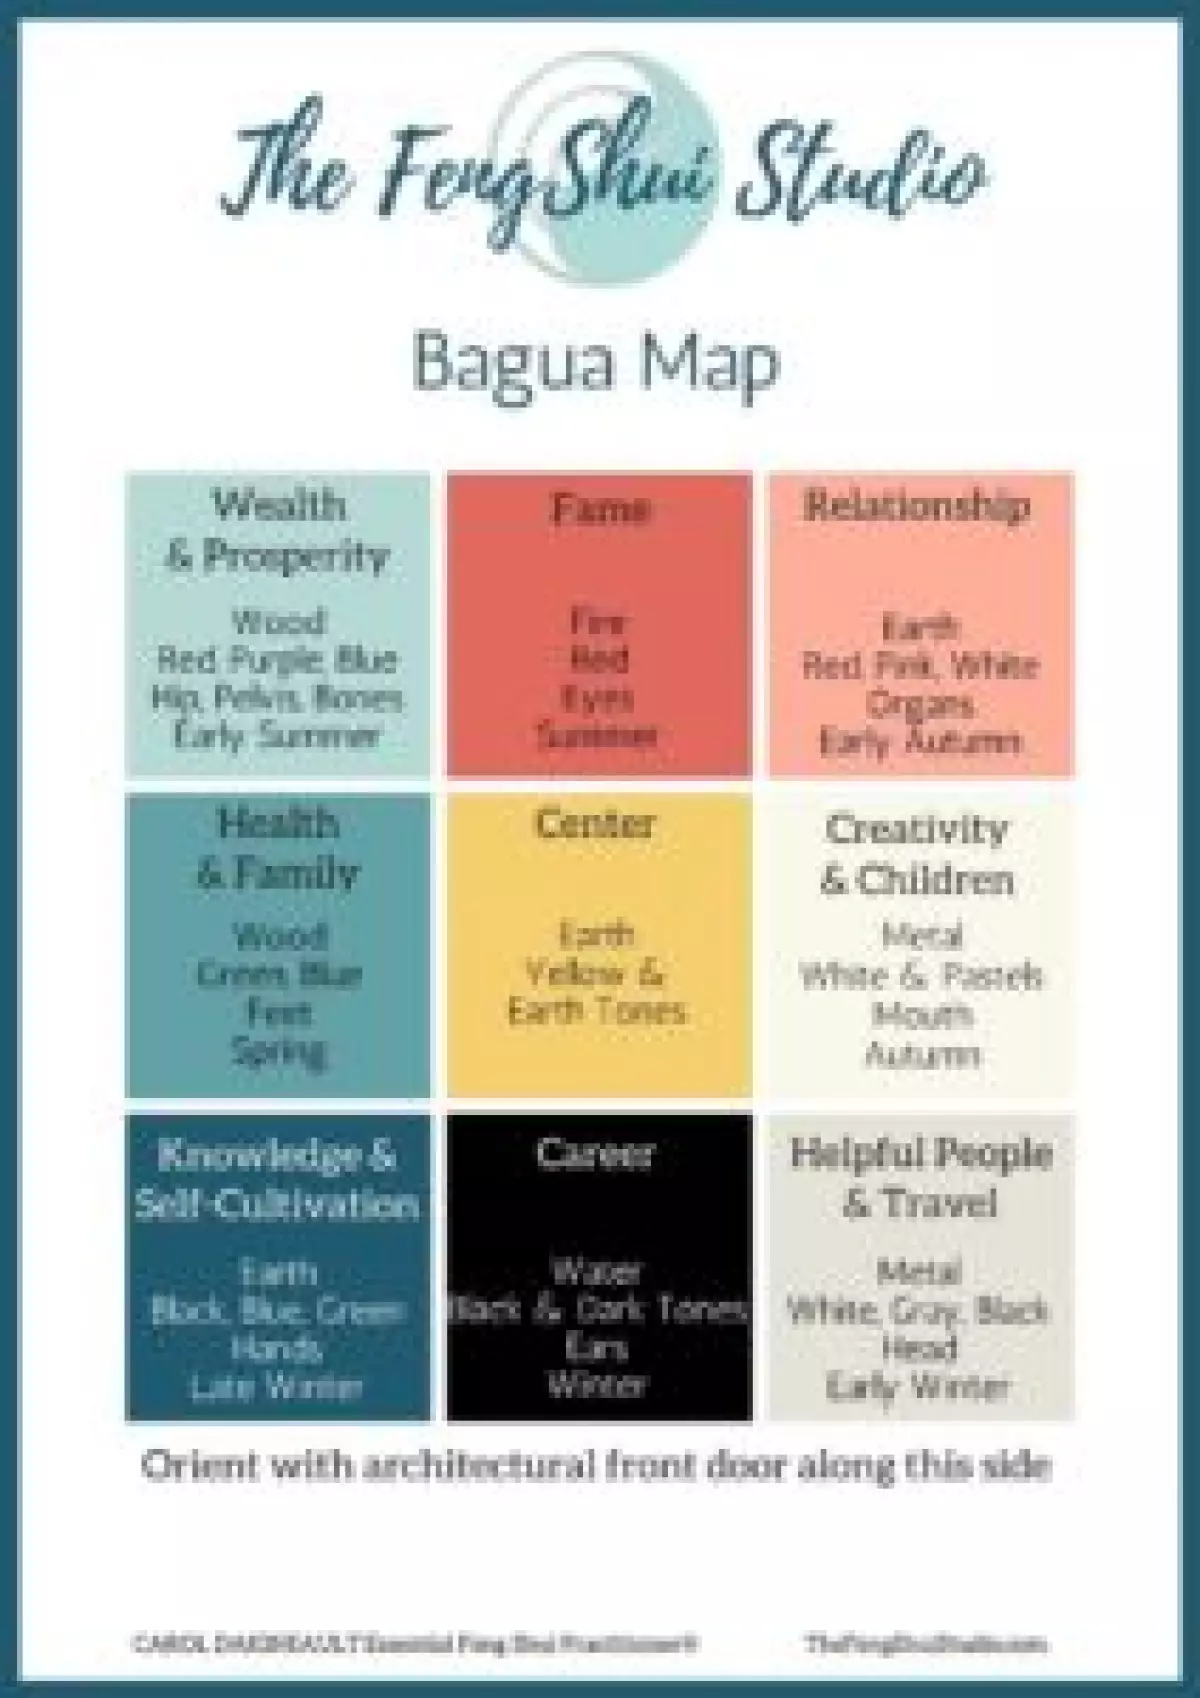 Get your FREE DOWNLOAD of my Feng Shui Bagua Map